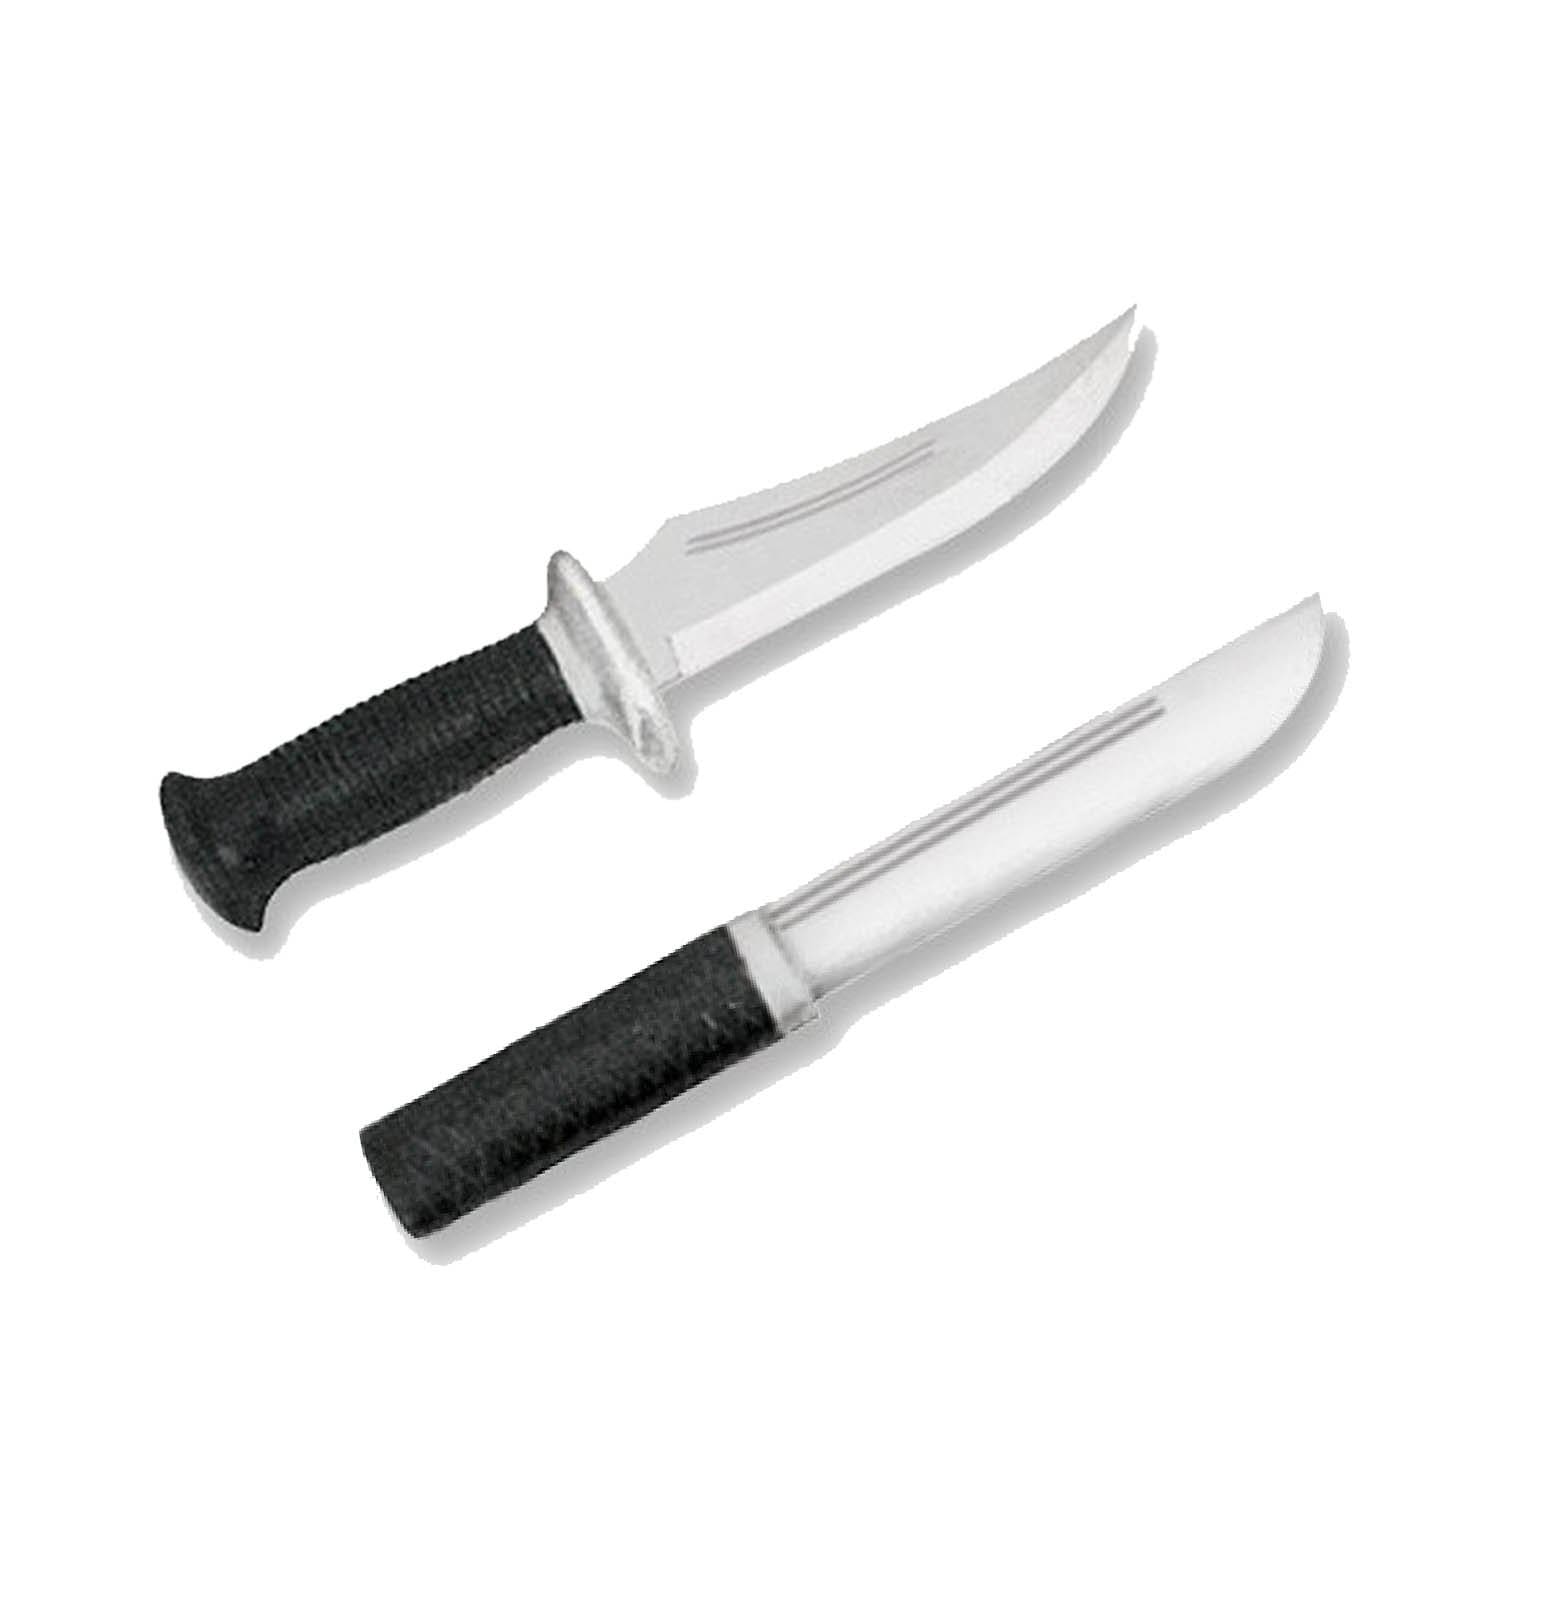 Martial Arts Supplies – KWON Equipment Rubber Knives